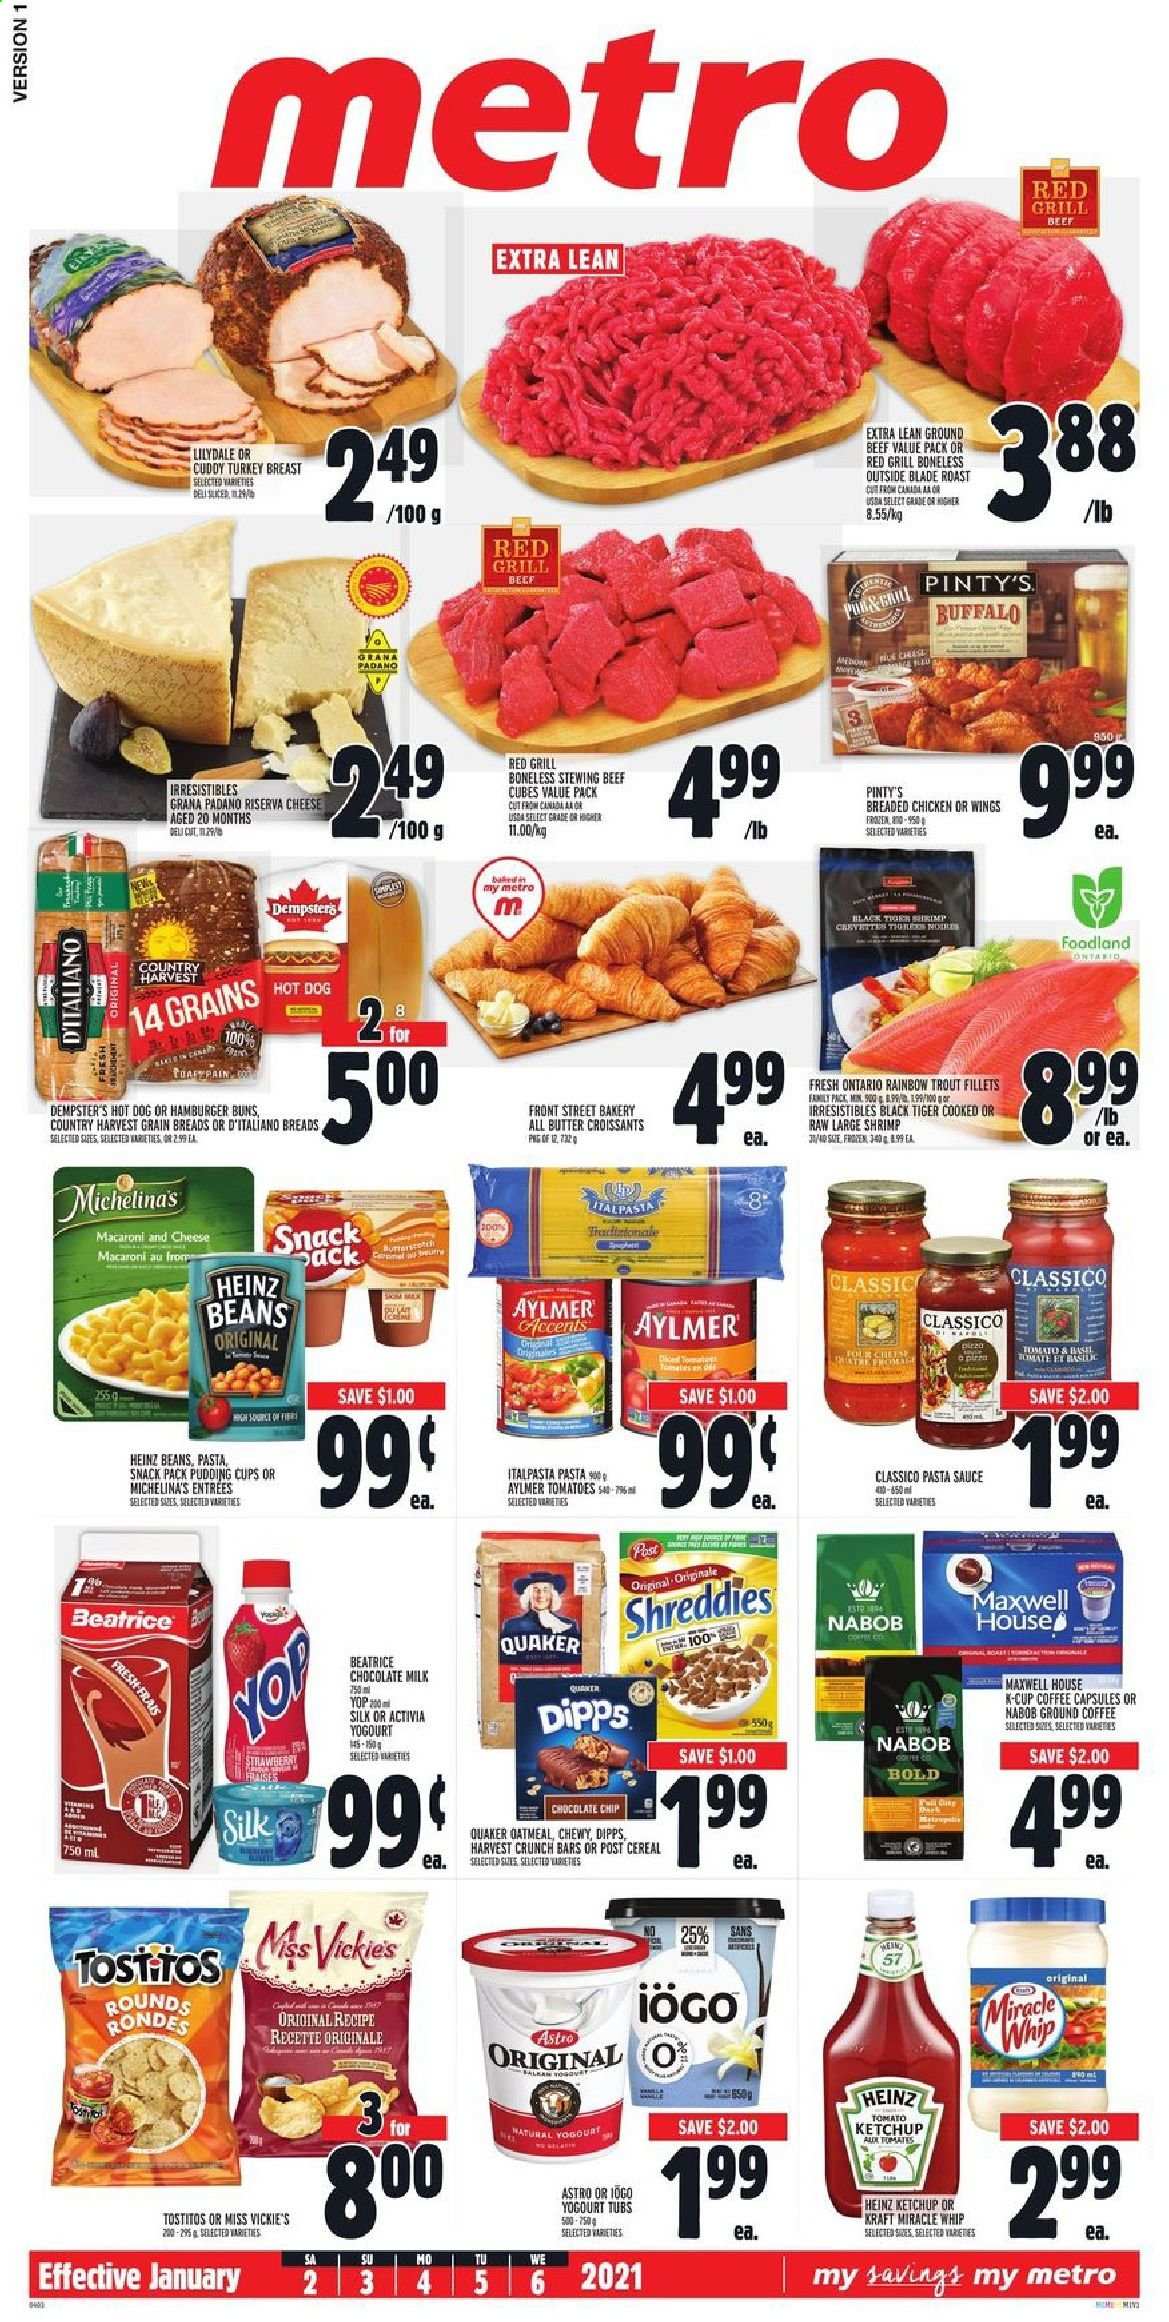 thumbnail - Metro Flyer - January 02, 2021 - January 06, 2021 - Sales products - croissant, buns, burger buns, trout, shrimps, macaroni & cheese, hot dog, pasta sauce, sauce, fried chicken, Quaker, Kraft®, Grana Padano, pudding, Activia, Silk, Miracle Whip, Country Harvest, chocolate chips, Tostitos, oatmeal, Heinz, cereals, esponja, Classico, Maxwell House, coffee, ground coffee, coffee capsules, K-Cups, turkey breast, turkey, beef meat, ground beef, stewing beef. Page 1.